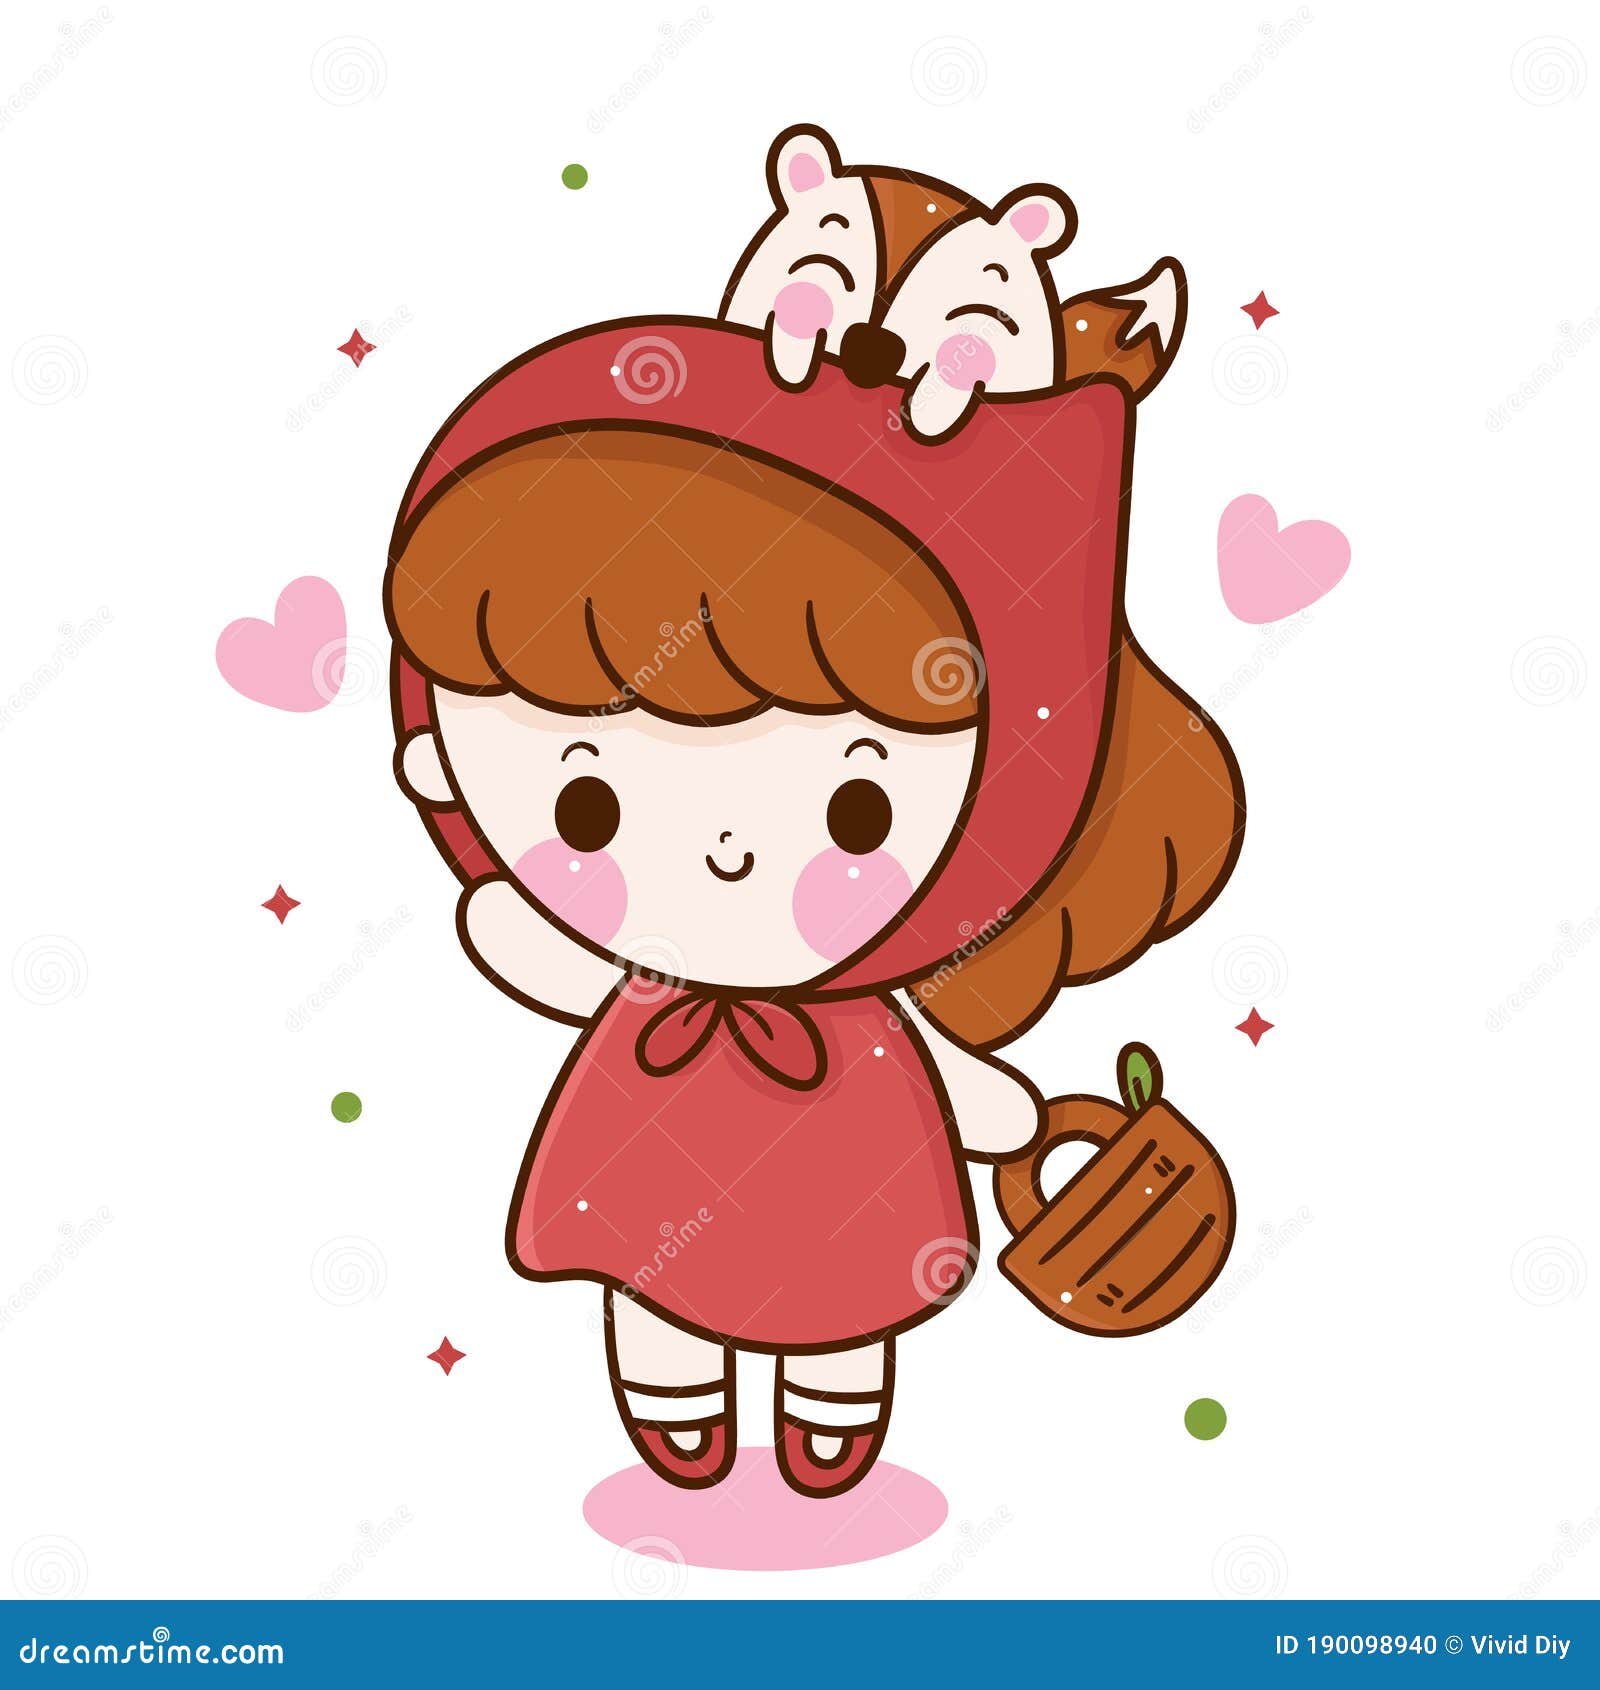 Characters Little Red Riding Hood Cartoon Girl And Wolf Stock Vector Illustration Of Charming Comic